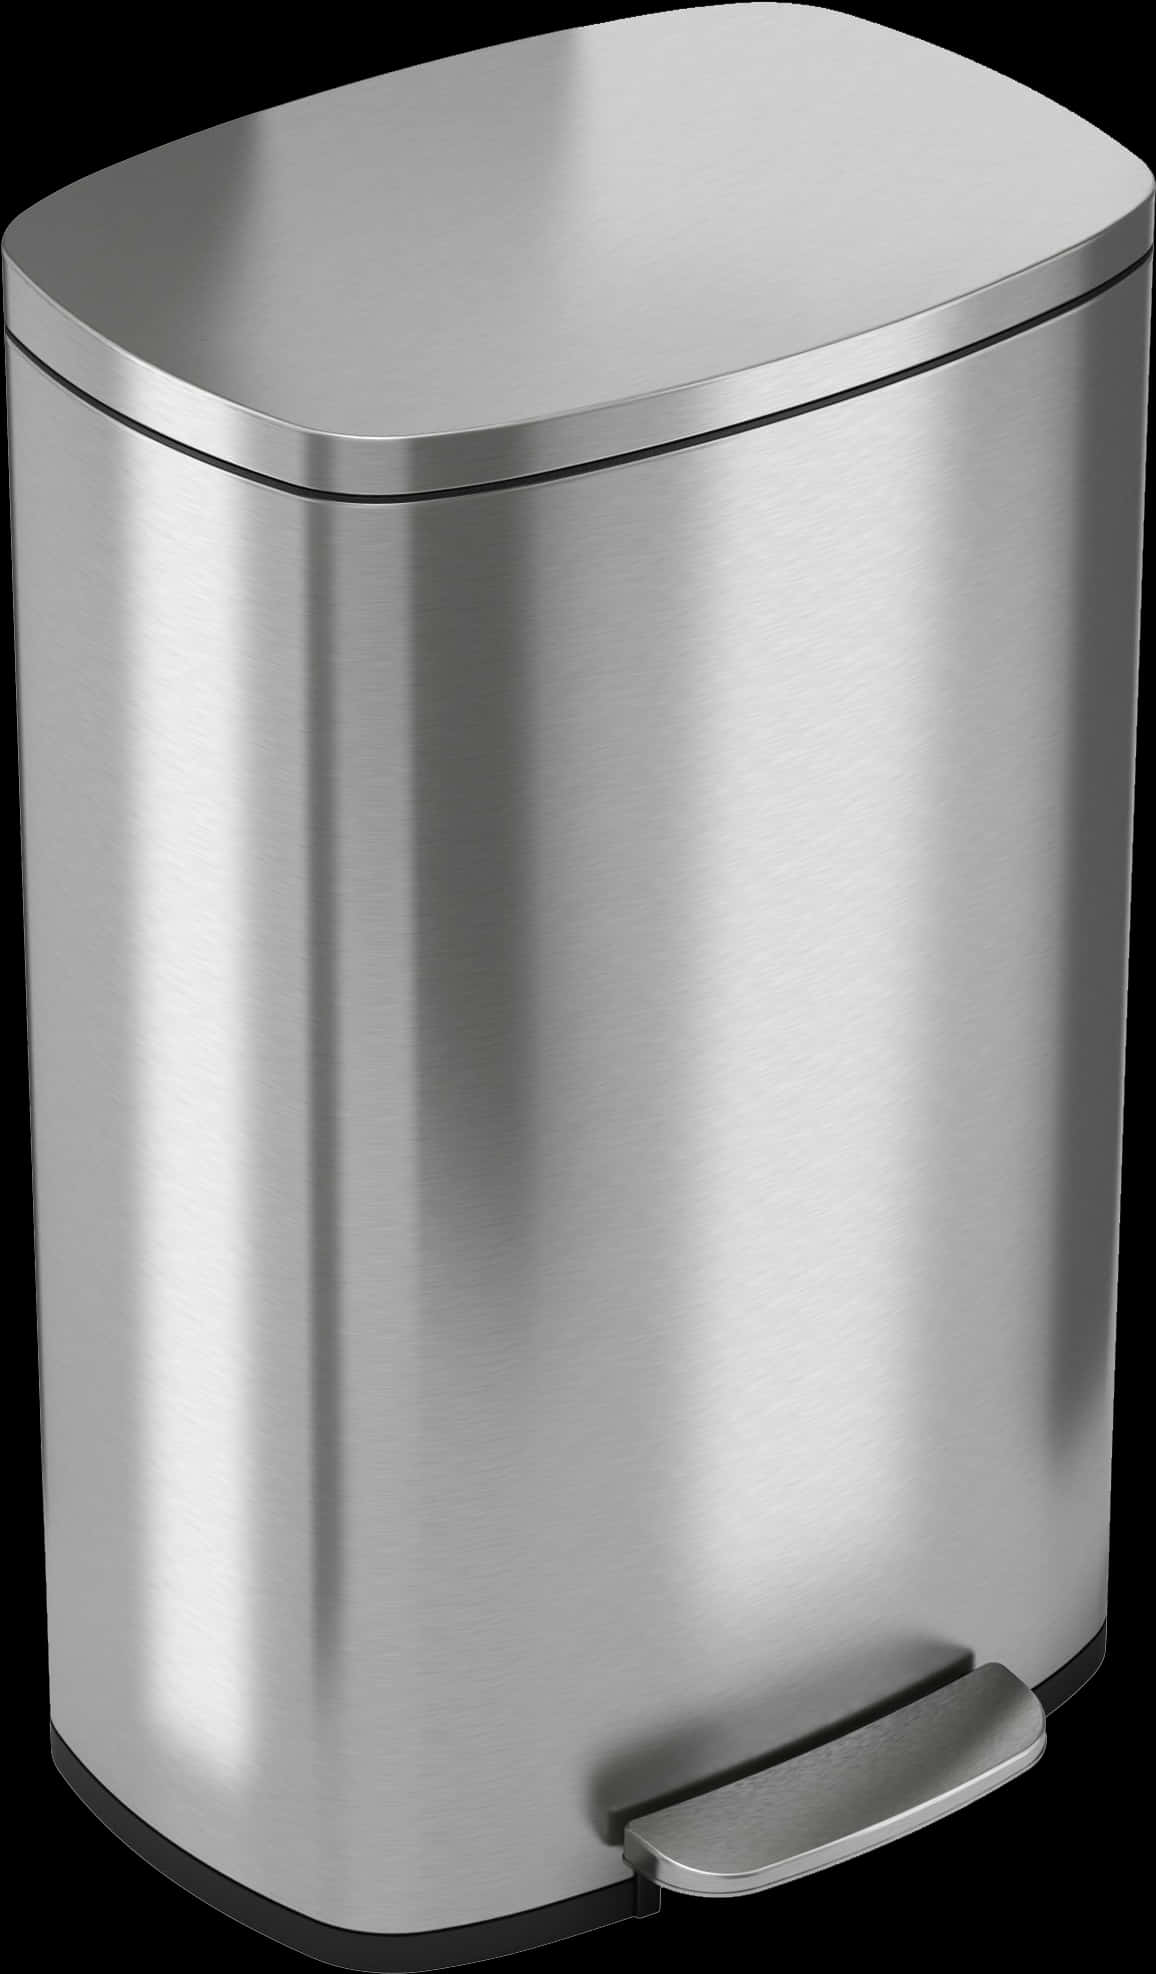 A Silver Trash Can With A Lid